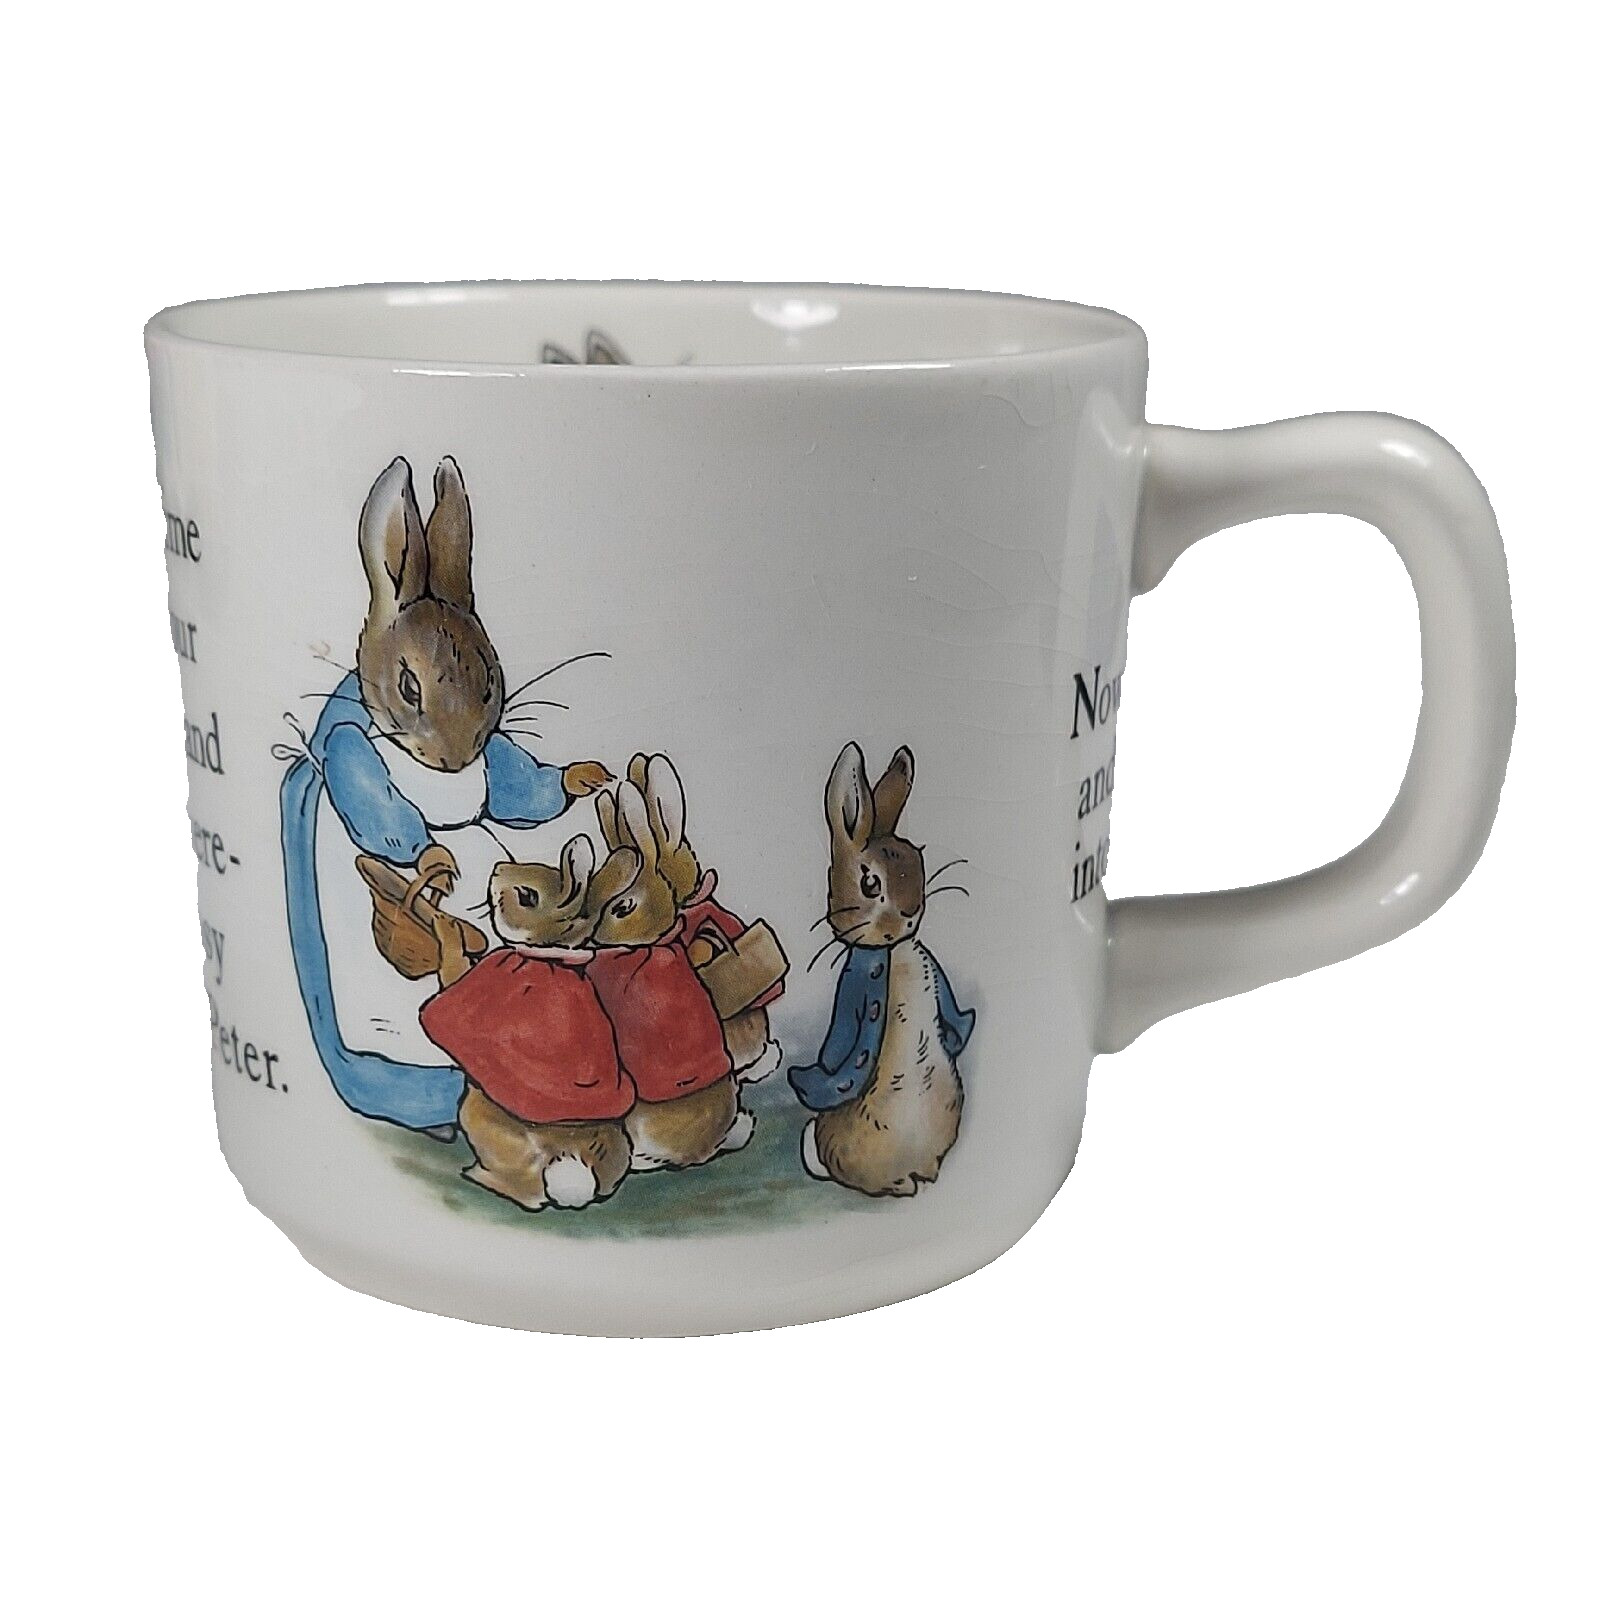 Wedgwood Peter Rabbit Childs\' cup. Porcelain. Made in England 3.75\